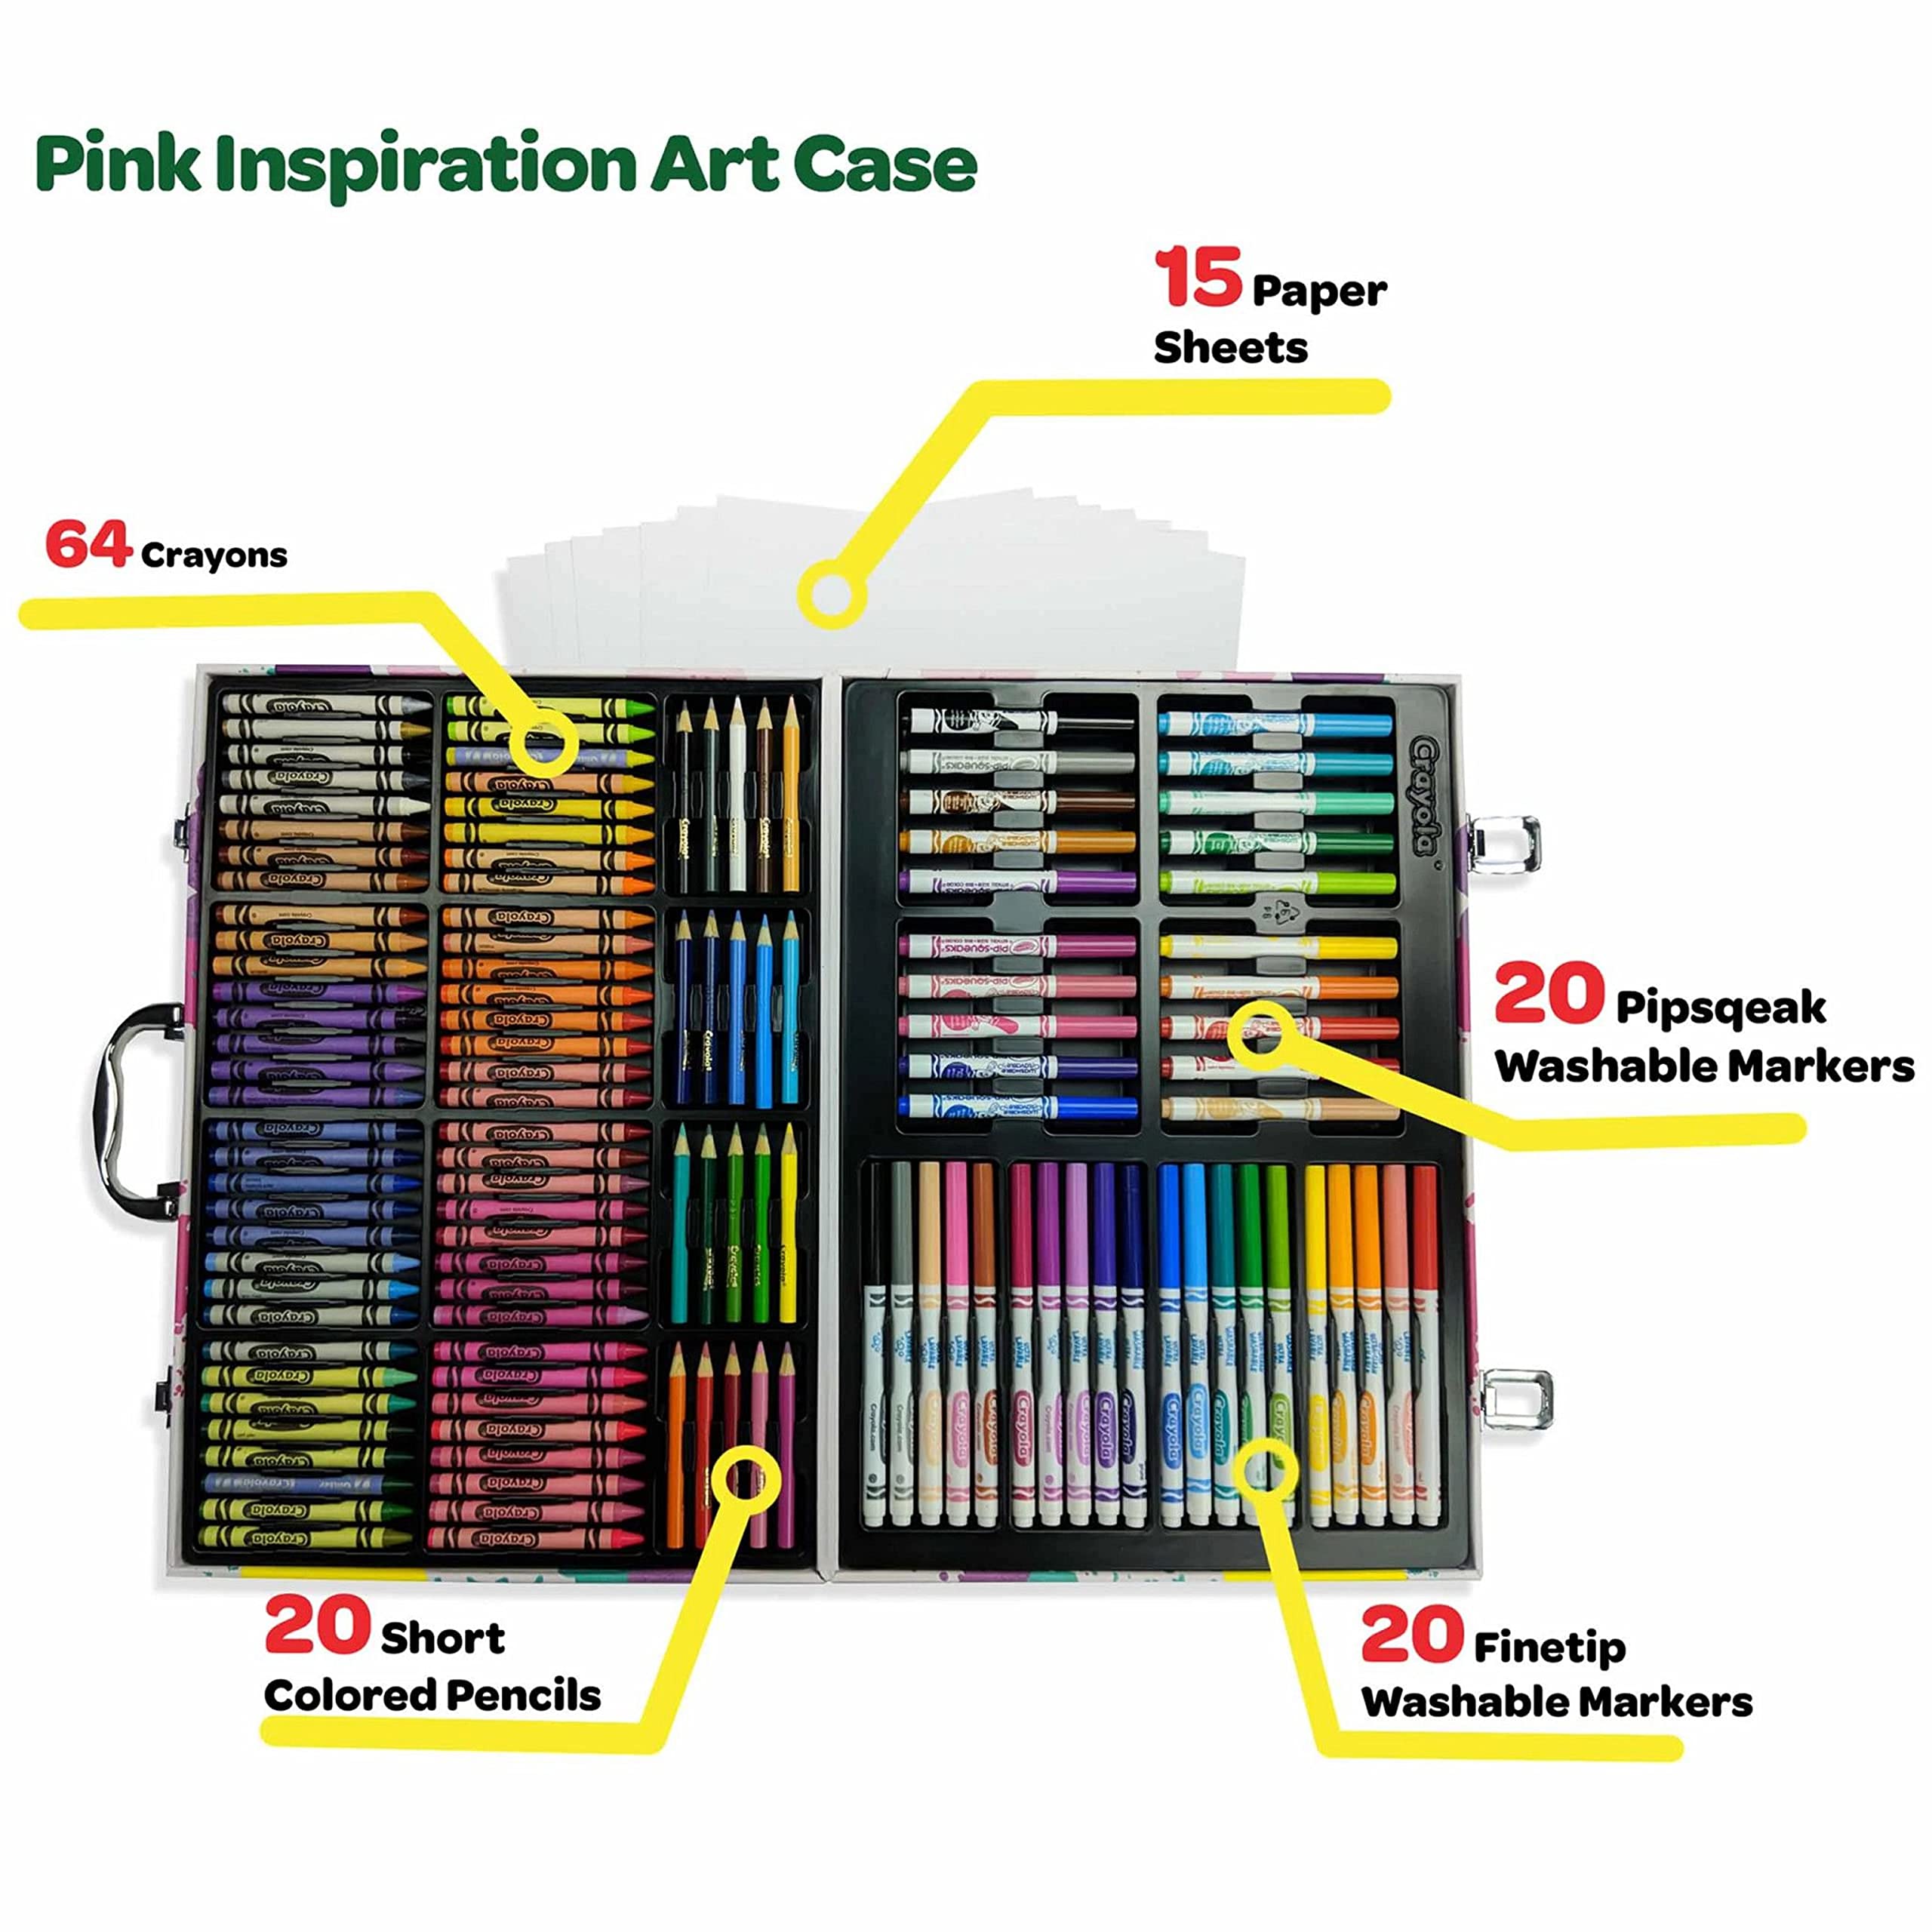 Crayola Inspiration Art Case Coloring Set - Pink (140 Count), Art Set For Kids, Kids Drawing Kit, School Supplies for Girls & Boys [Amazon Exclusive]